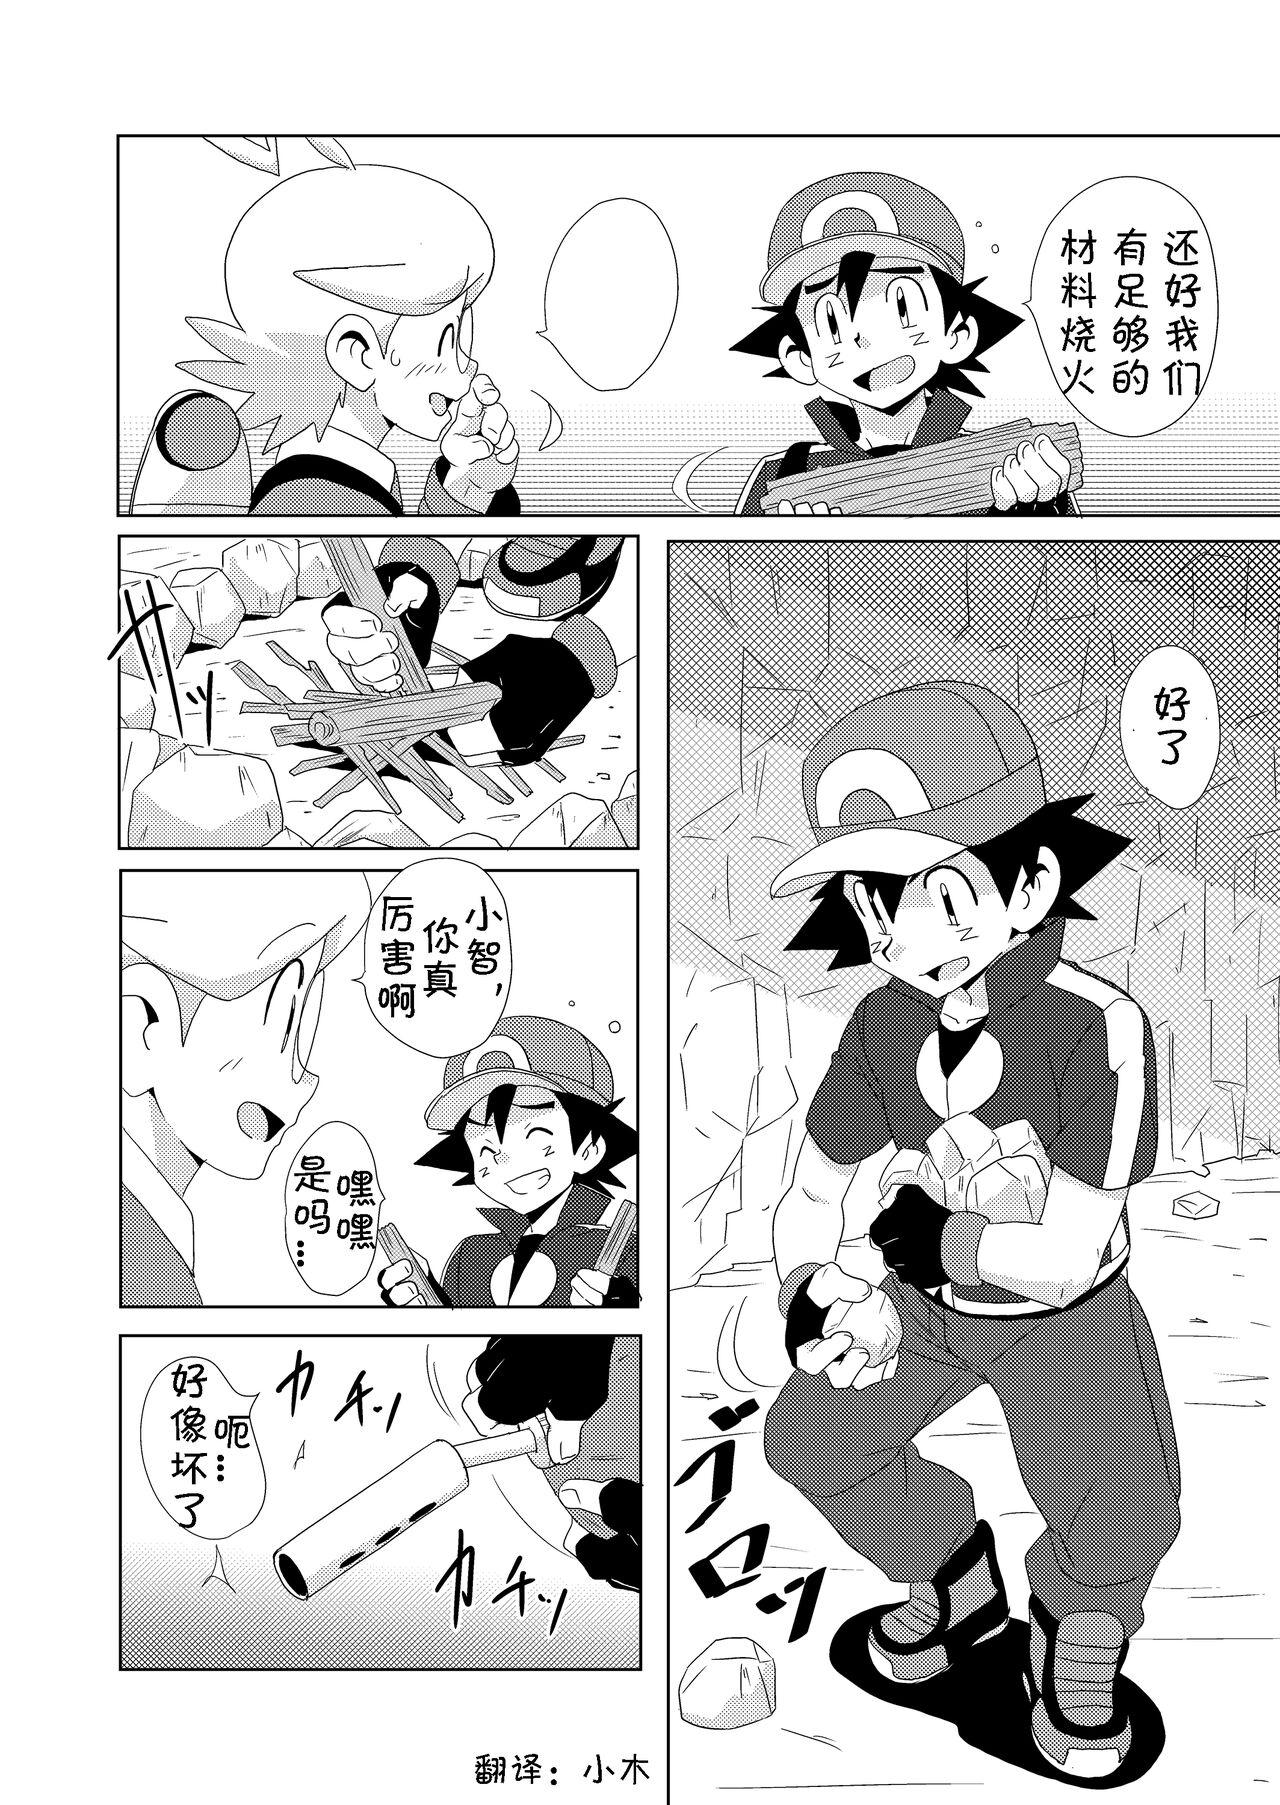 Cfnm The Rainbow Connection - Pokemon | pocket monsters Stepsister - Page 4